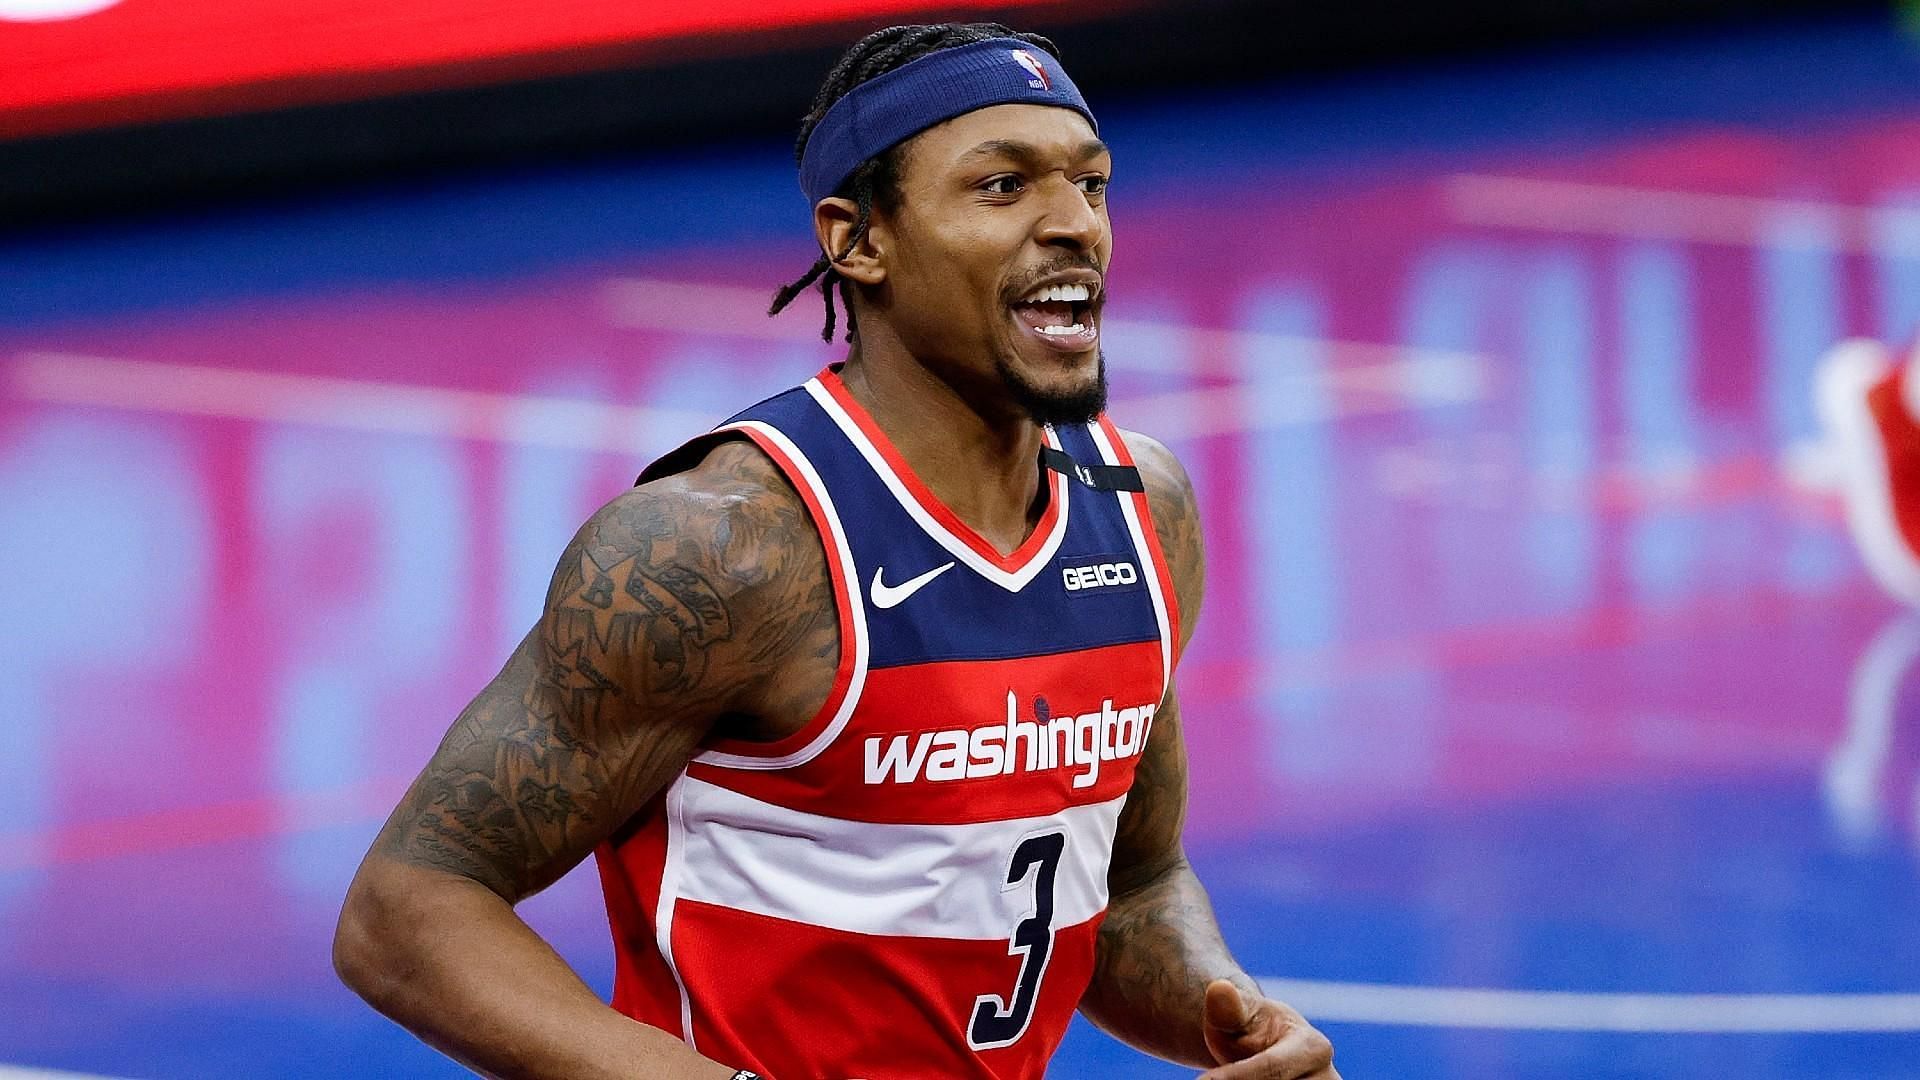 The pressure is now on Bradley Beal to deliver. [Photo: Sporting News]